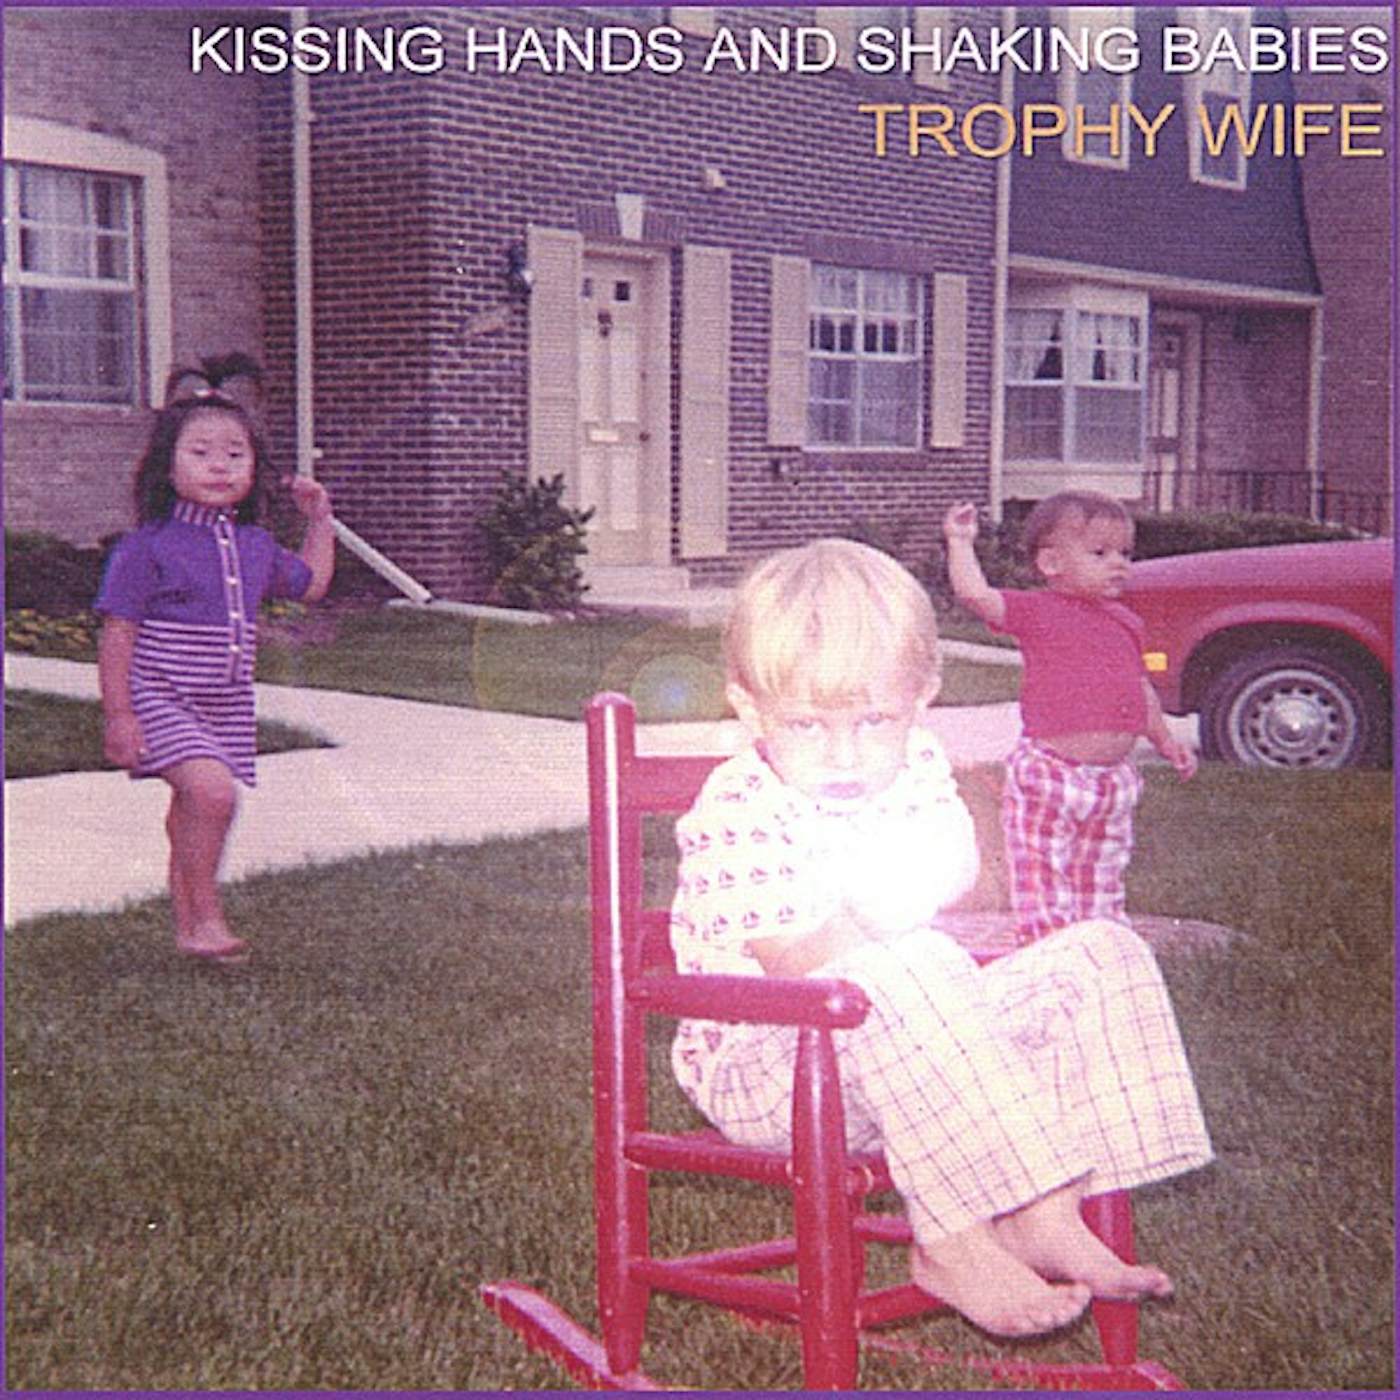 Trophy Wife KISSING HANDS & SHAKING BABIES CD